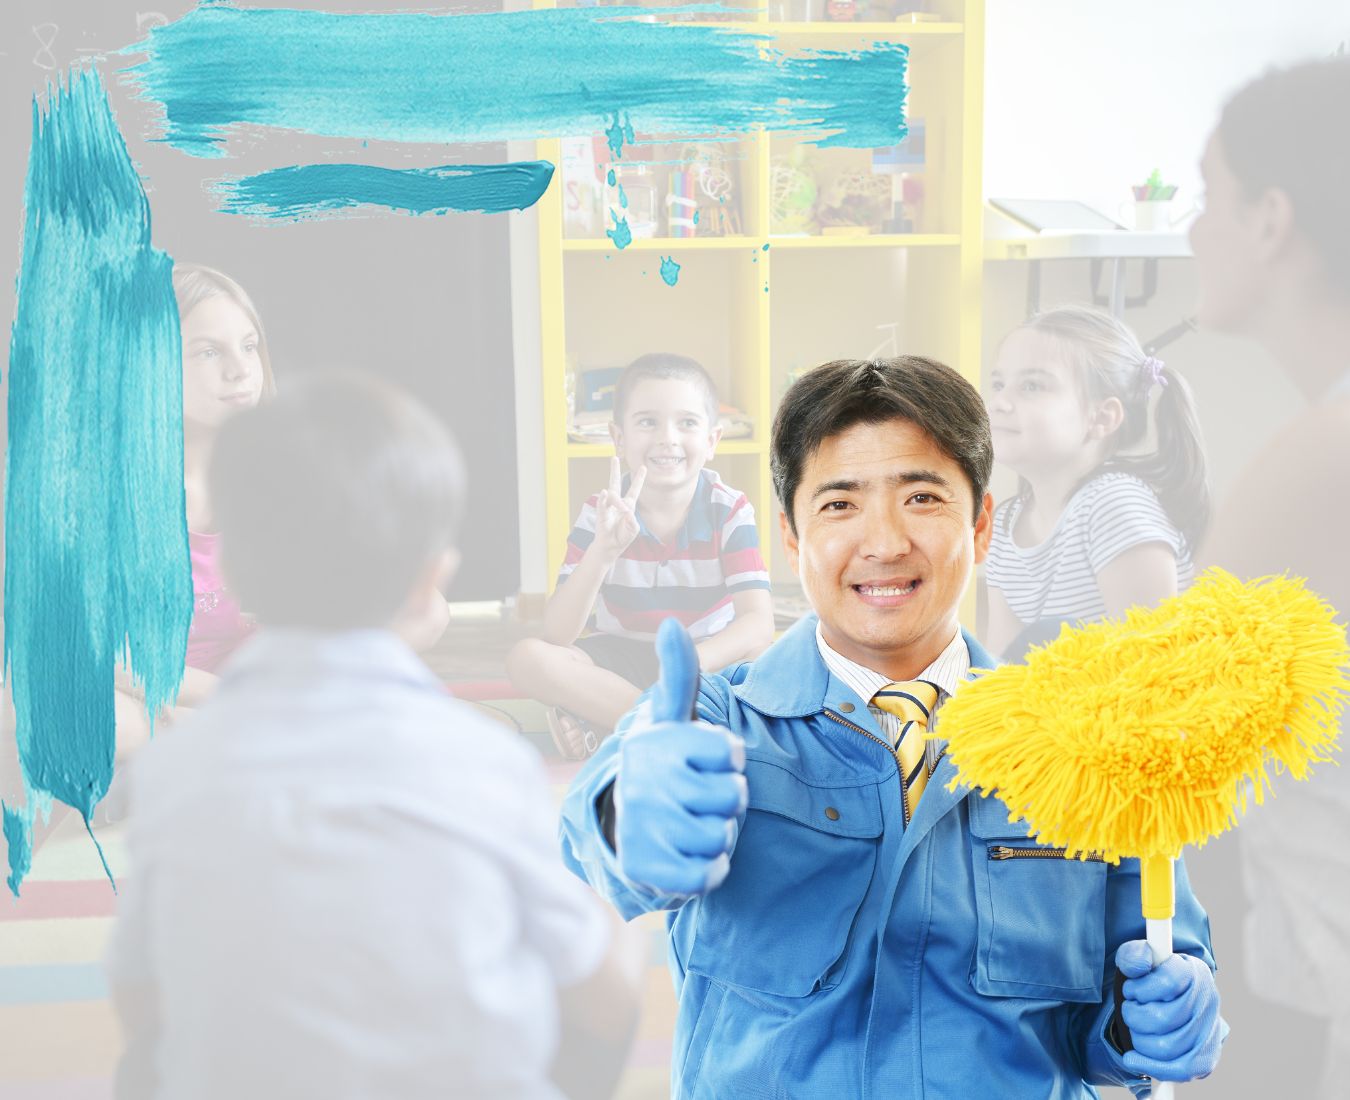 What is The Most Important Part of Cleaning Routine in Childcare?